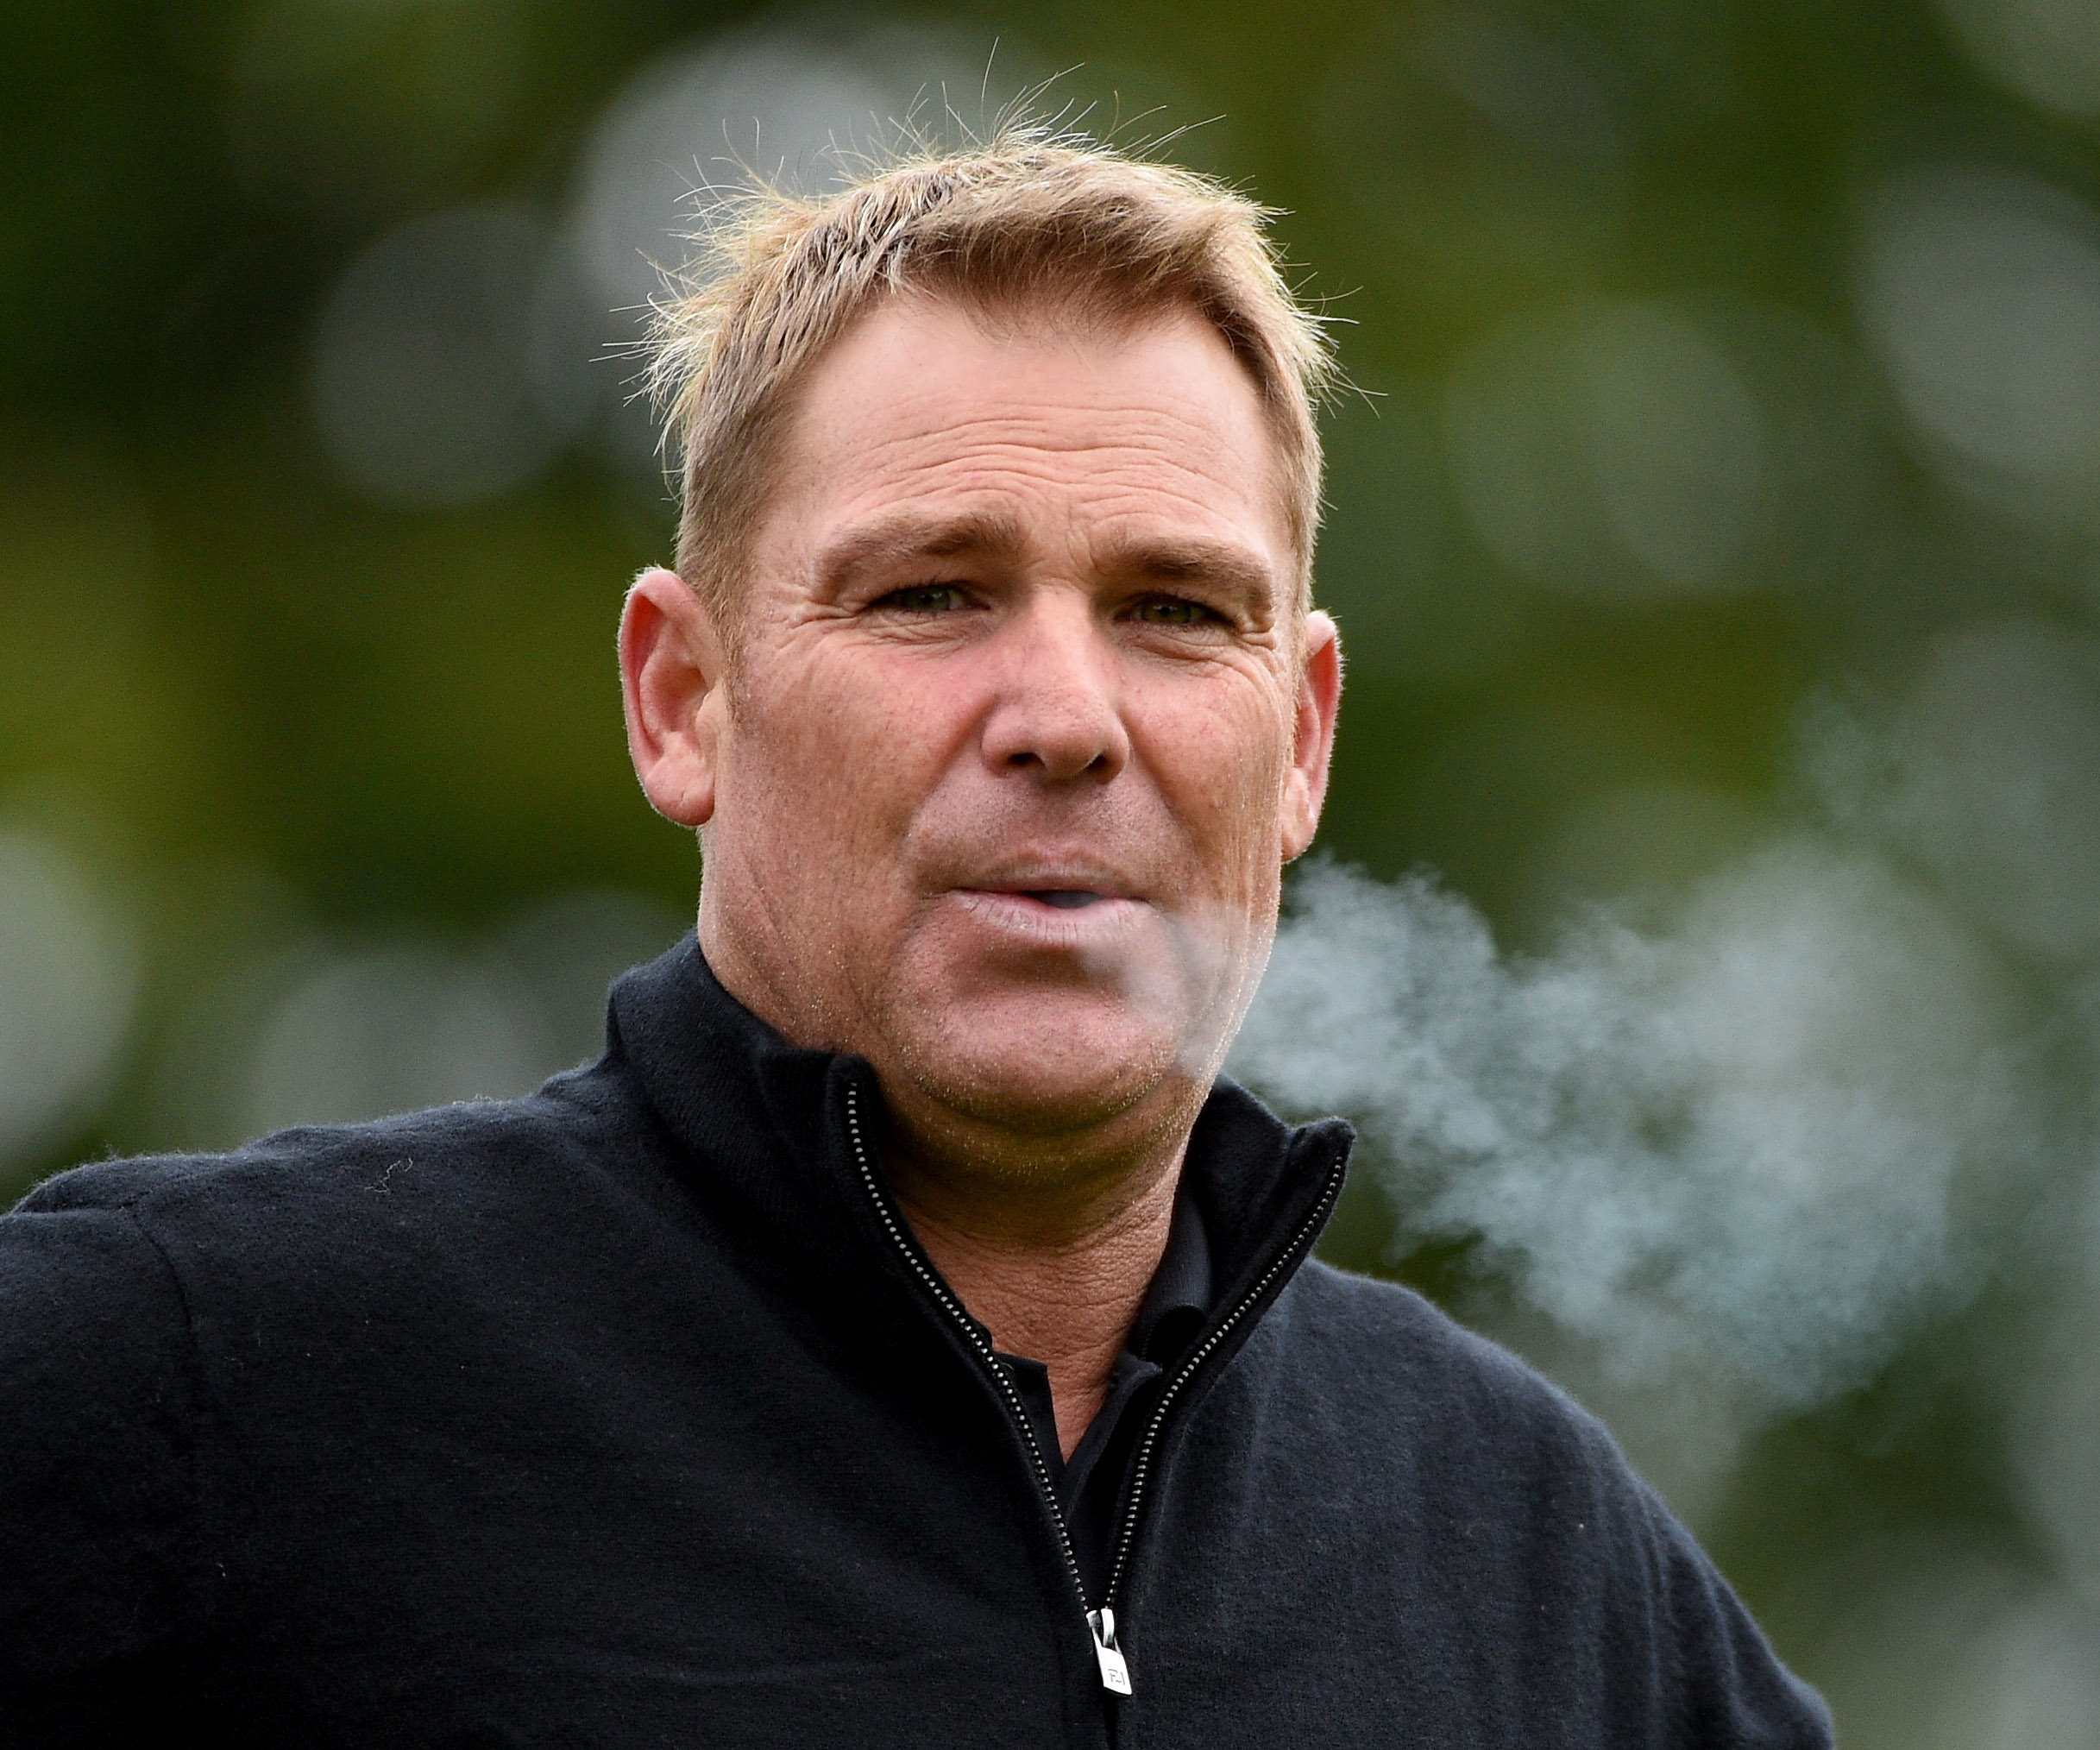 Shane Warne given special treatment on I’m A Celebrity…Get Me Out Of Here!